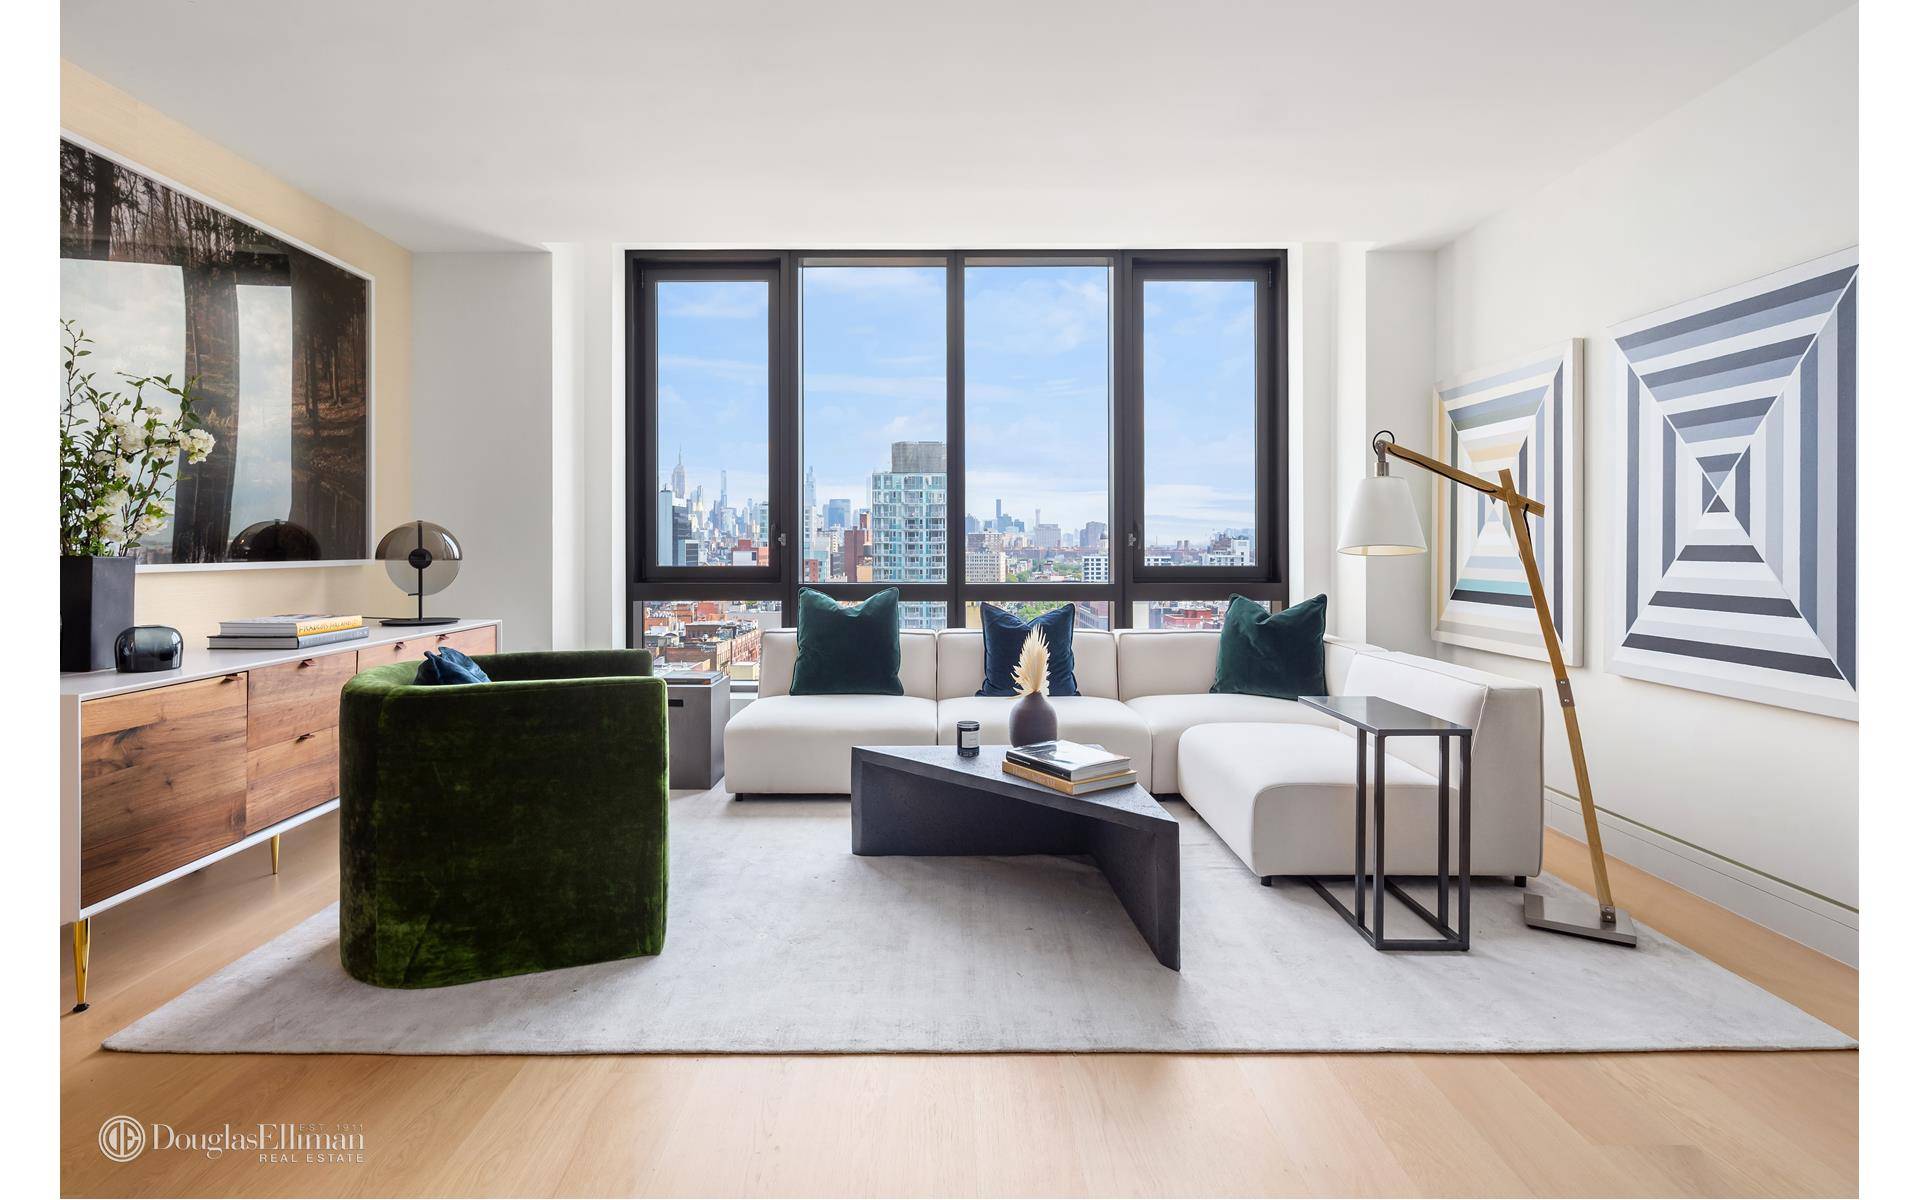 242 Broome represents a rare opportunity for anyone seeking a modern home in the Lower East Side, one of New York's most storied neighborhoods.